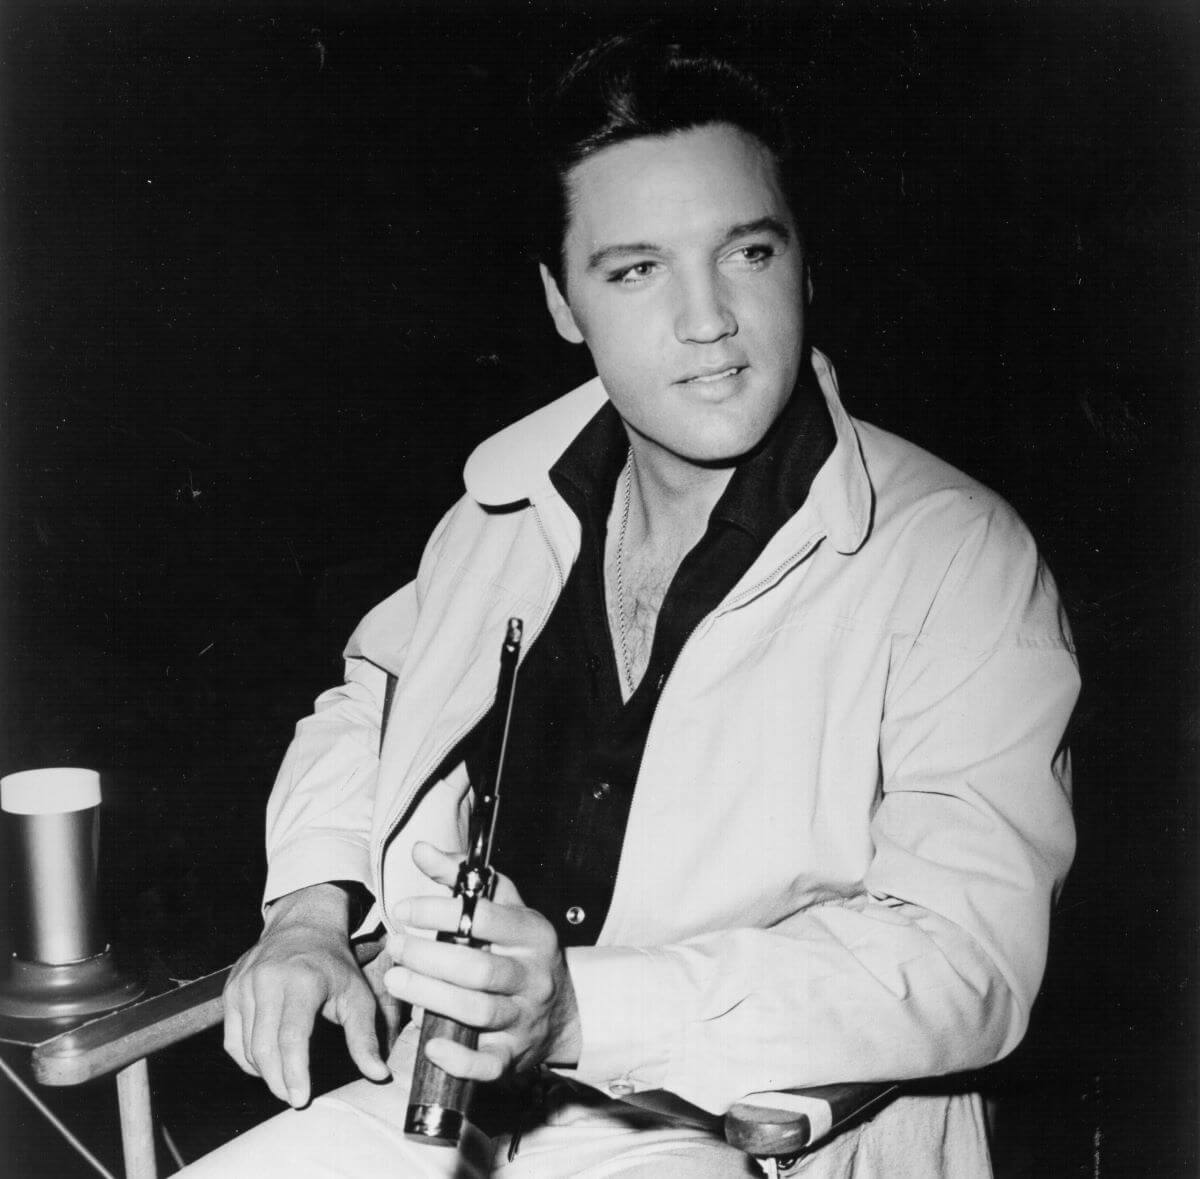 A black and white picture of Elvis sitting and holding a gun.